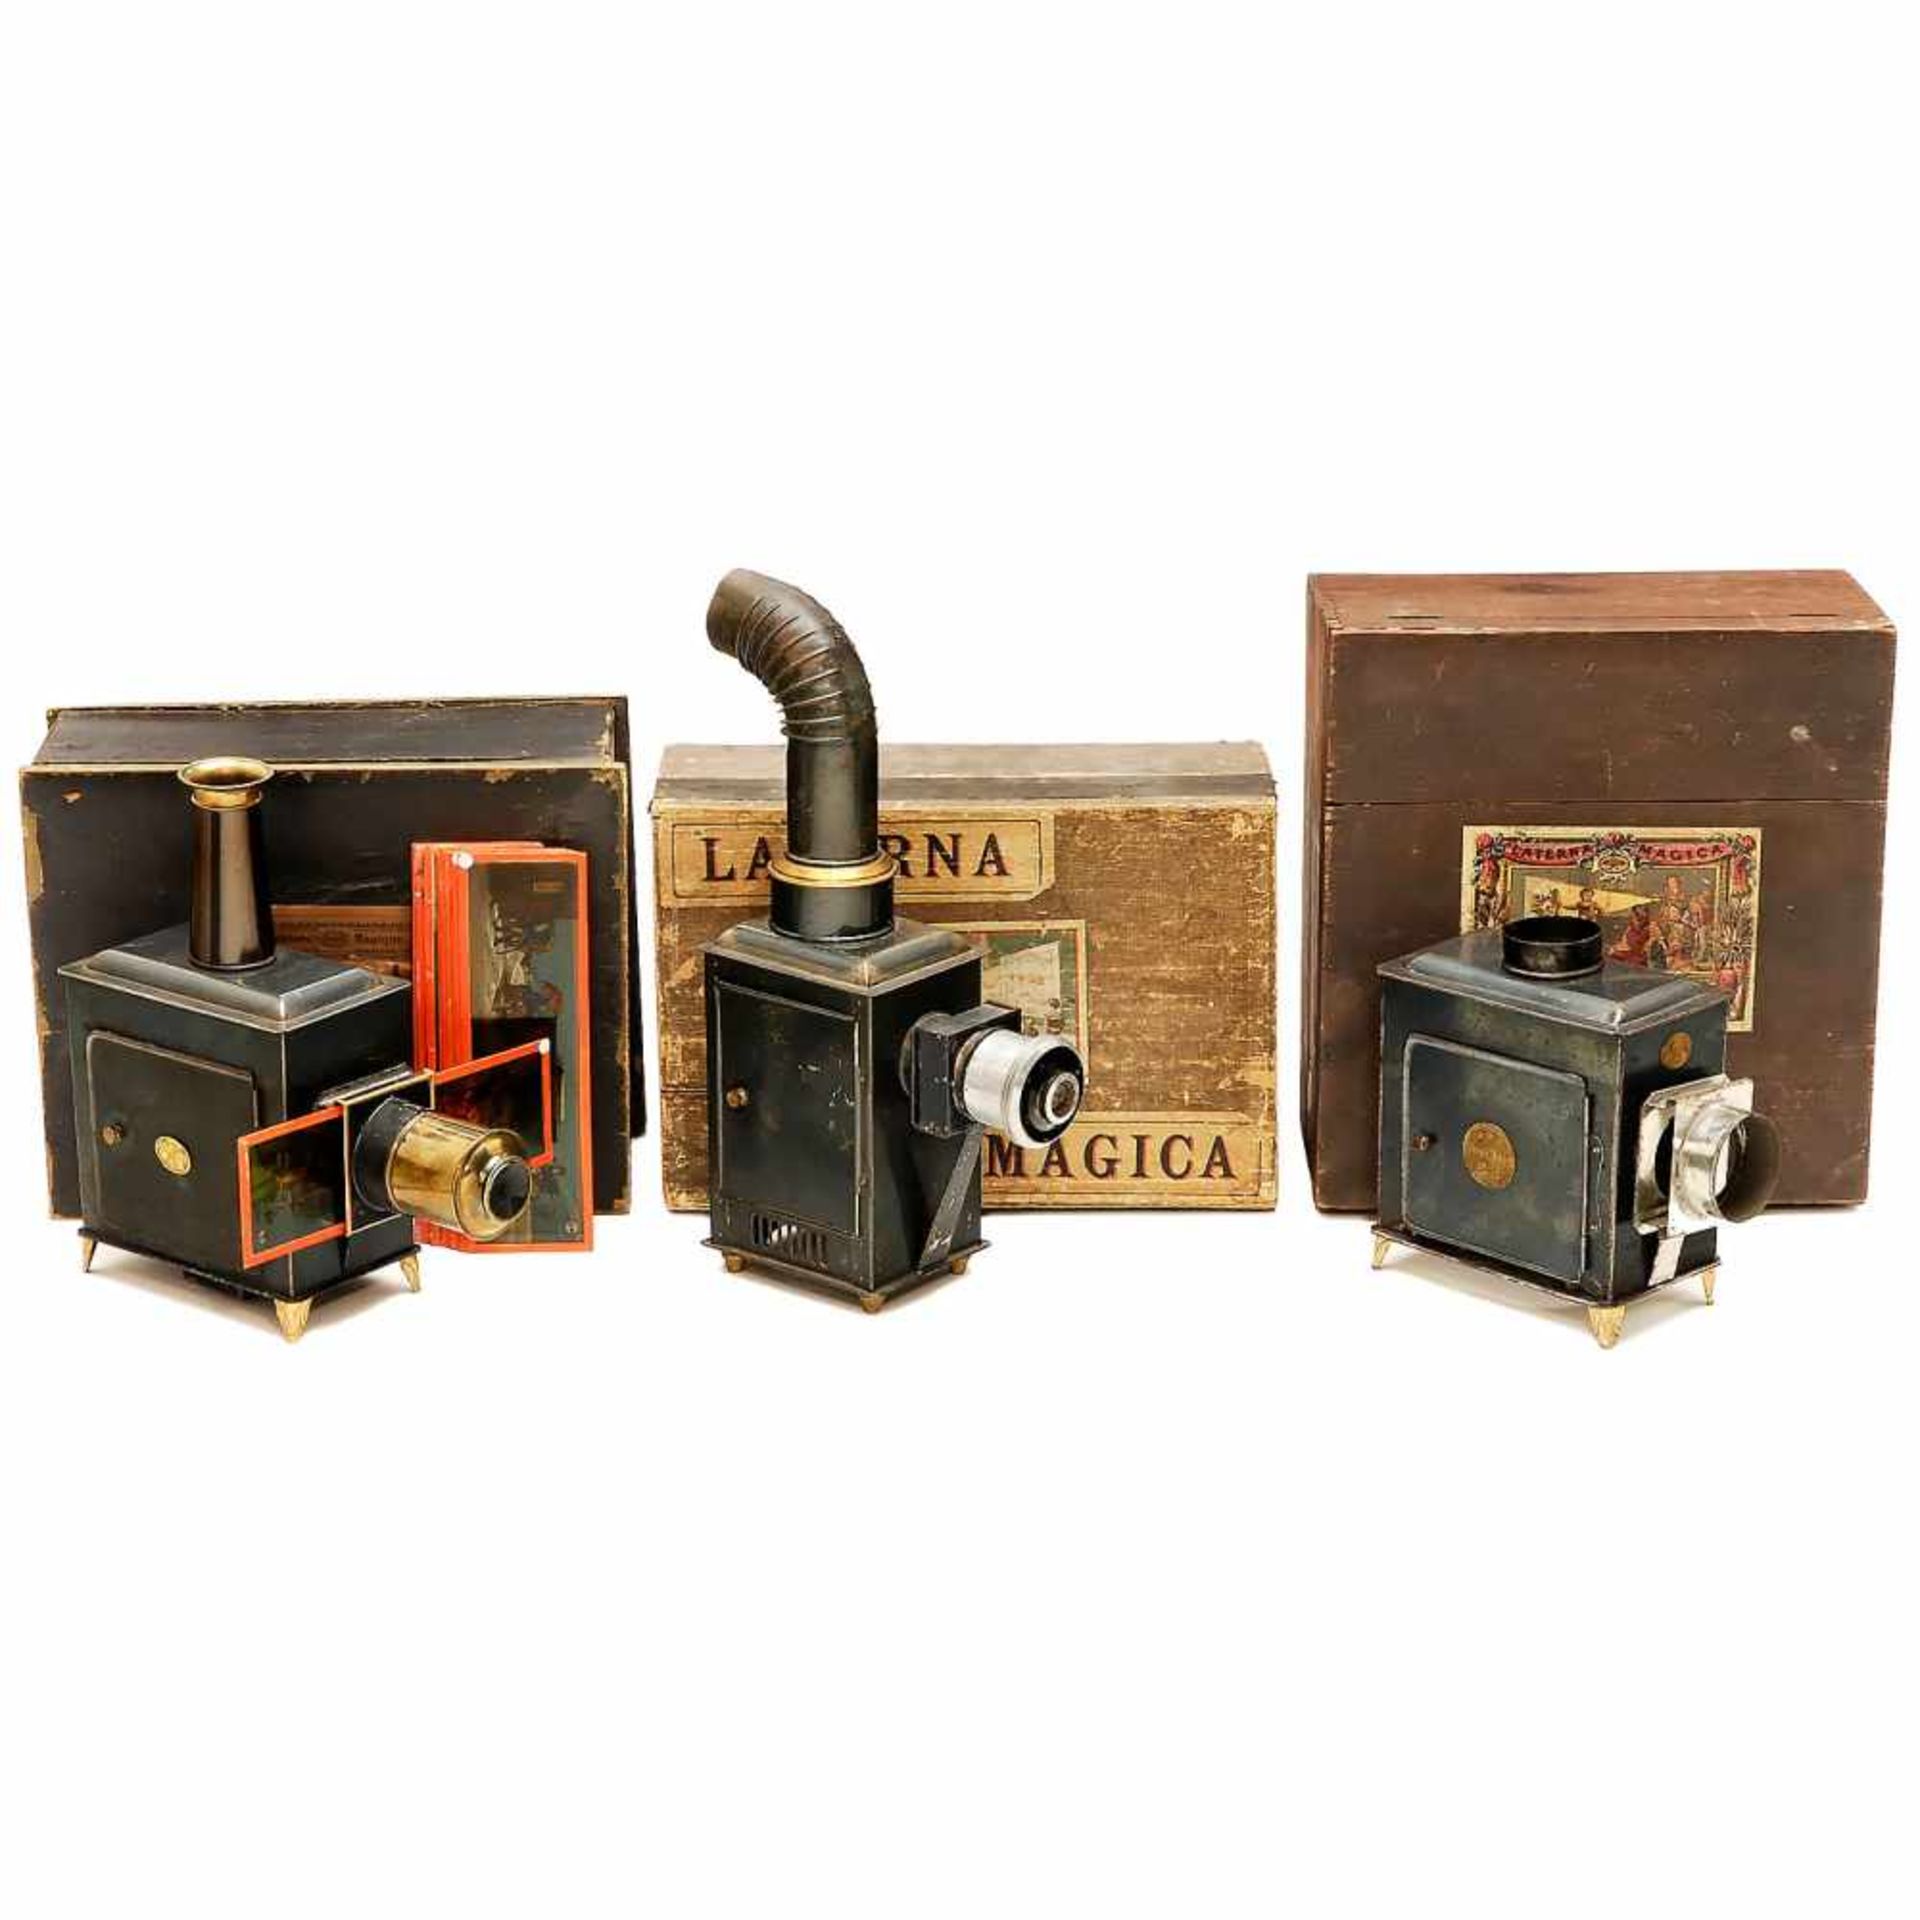 3 Magic Lanterns by Plank and Carette1) Georges Carette, Nuremberg. Magic lantern for slides with